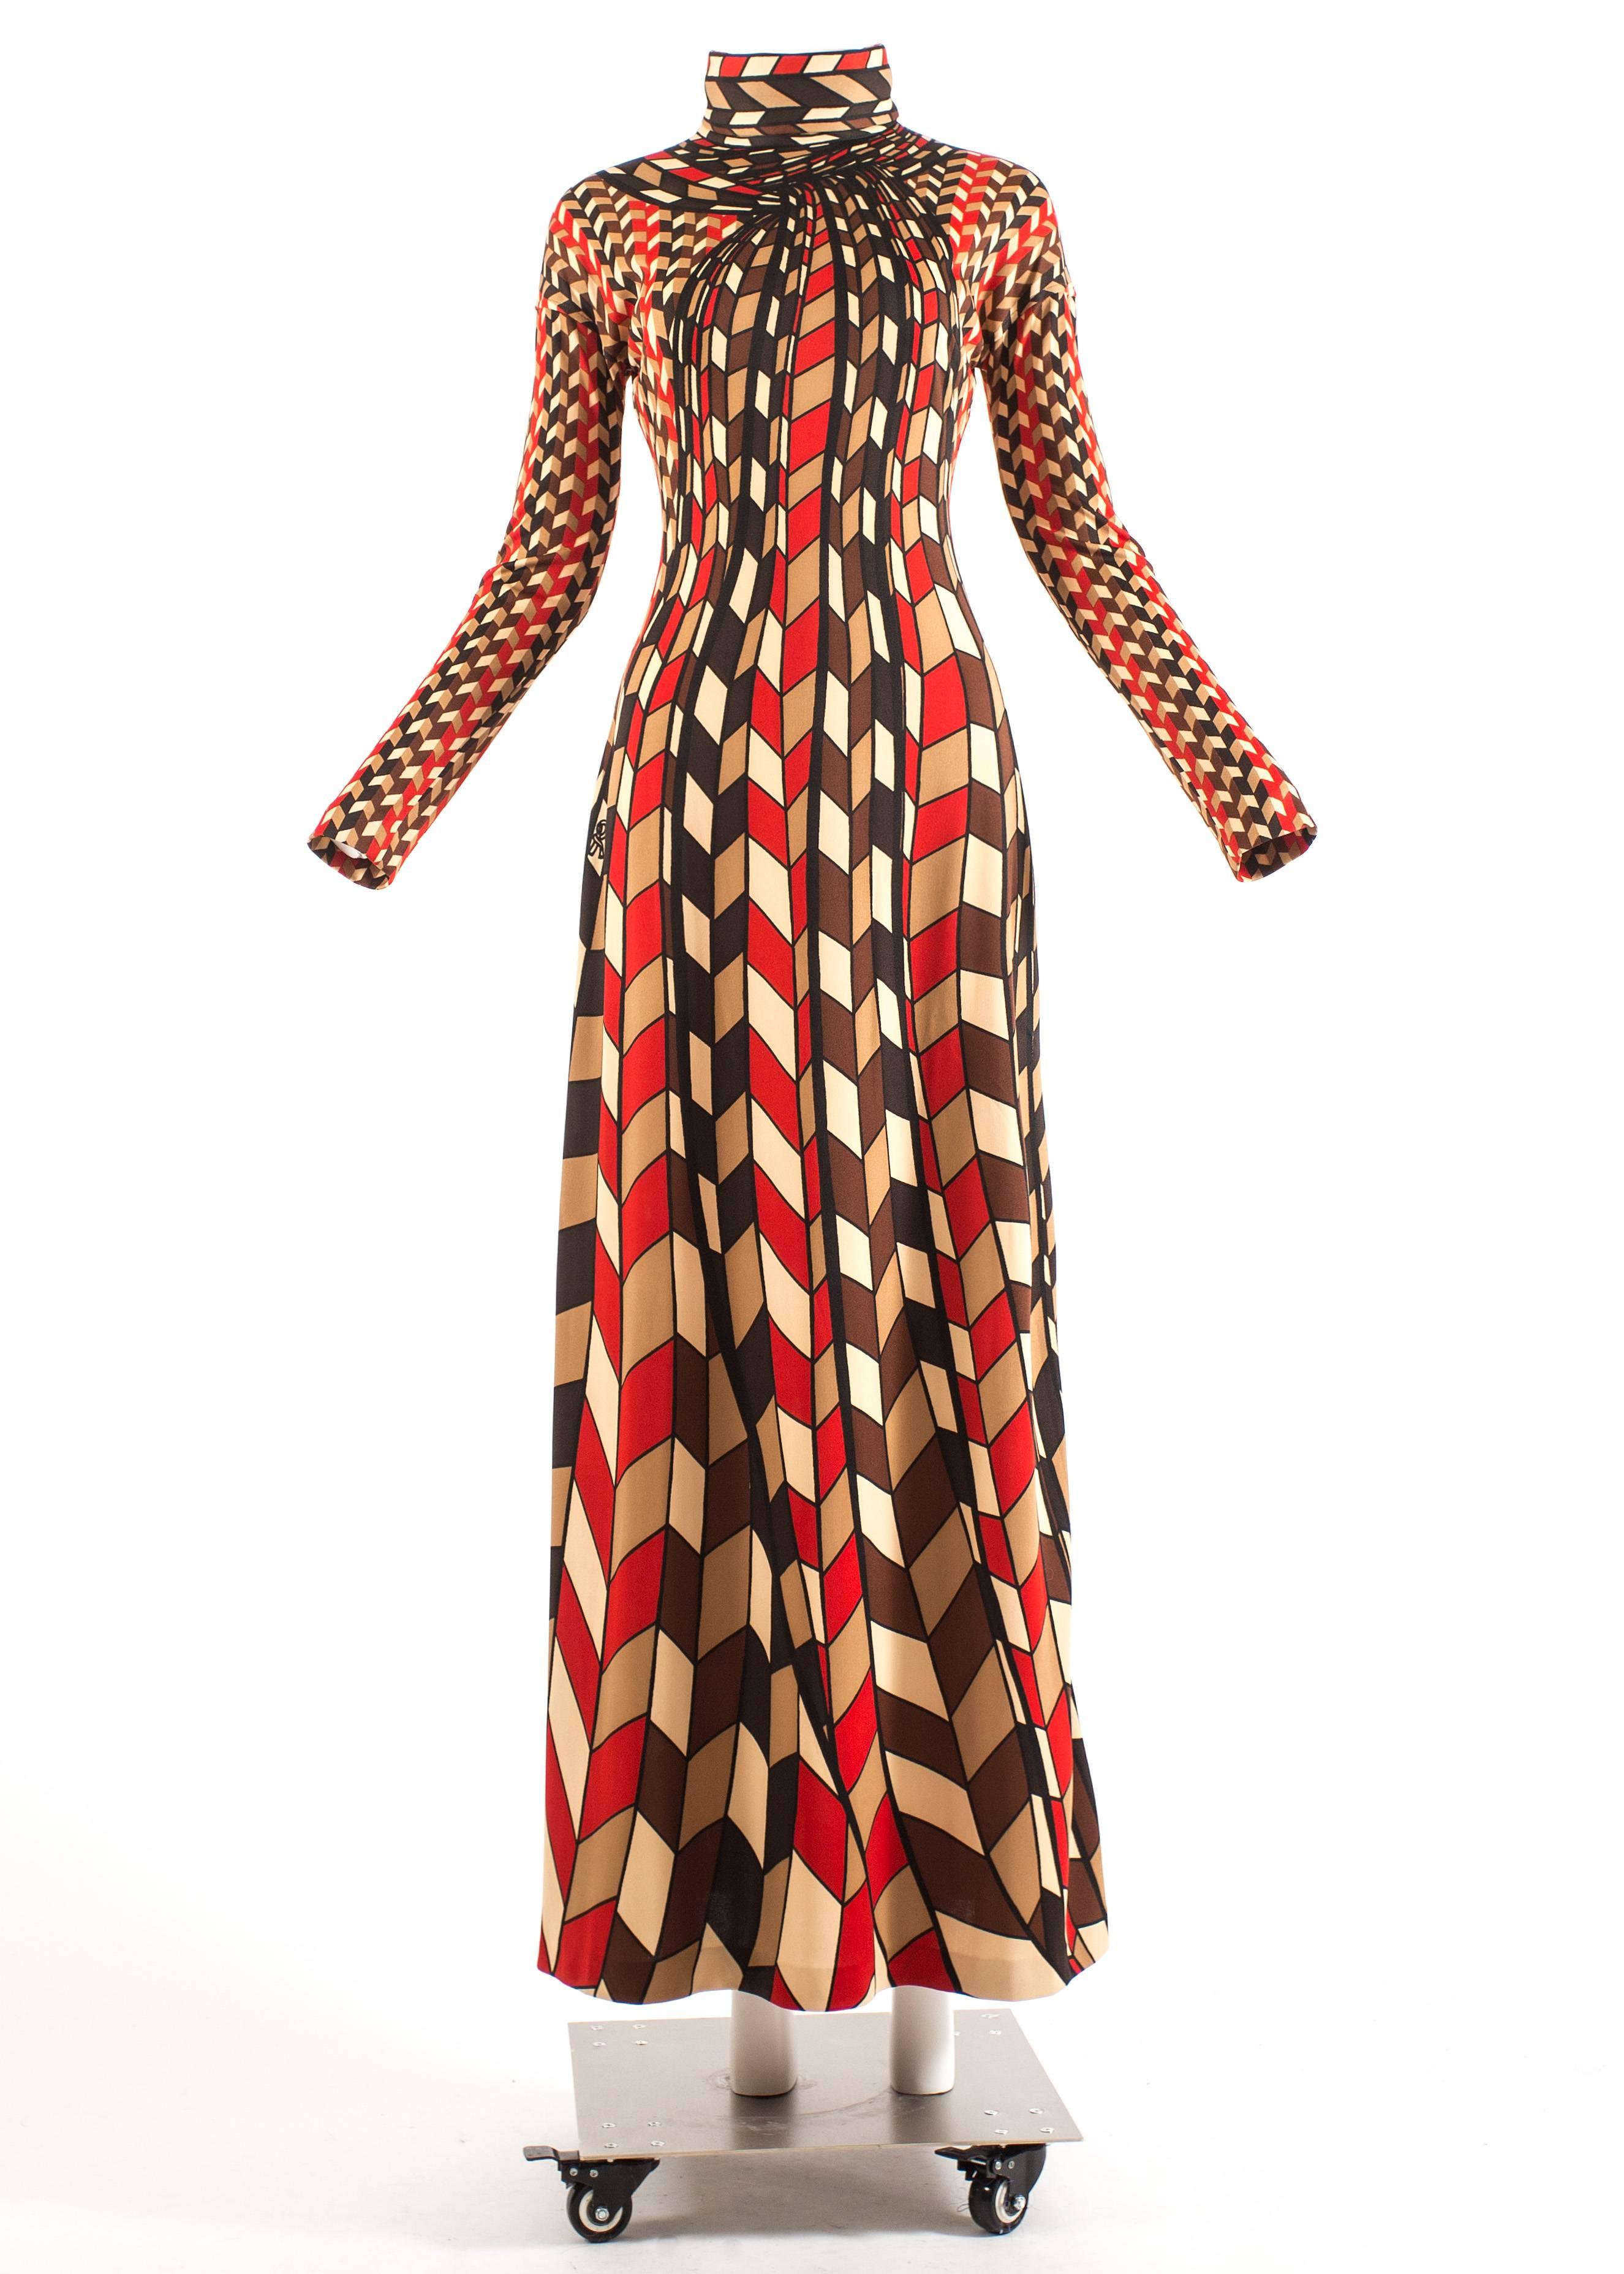 Roberta di Camerino 1976 jersey geometric scarf print maxi dress

- dressed in a panel-printed polyester jersey in a bared wire scarf print, which reproduces a large scarf rolled around the neck in red, brown, cream and navy blue.

- zip fastening